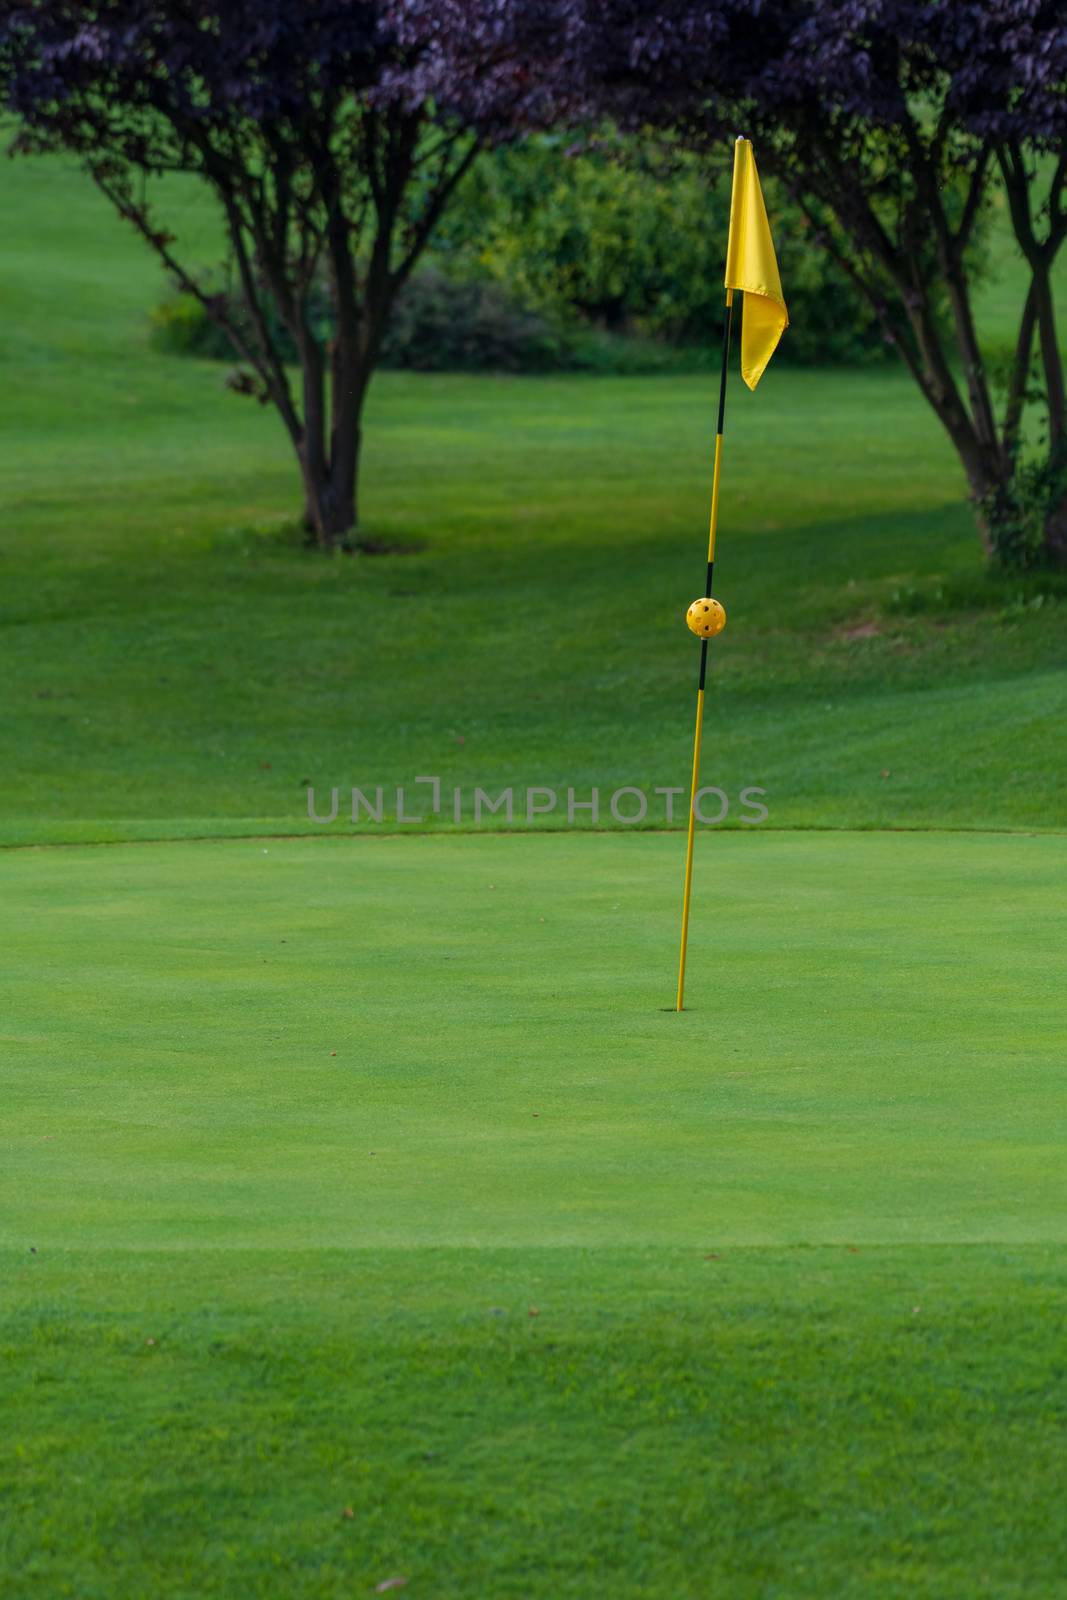 Golf Course, golf green with flag in the hole, yellow flag